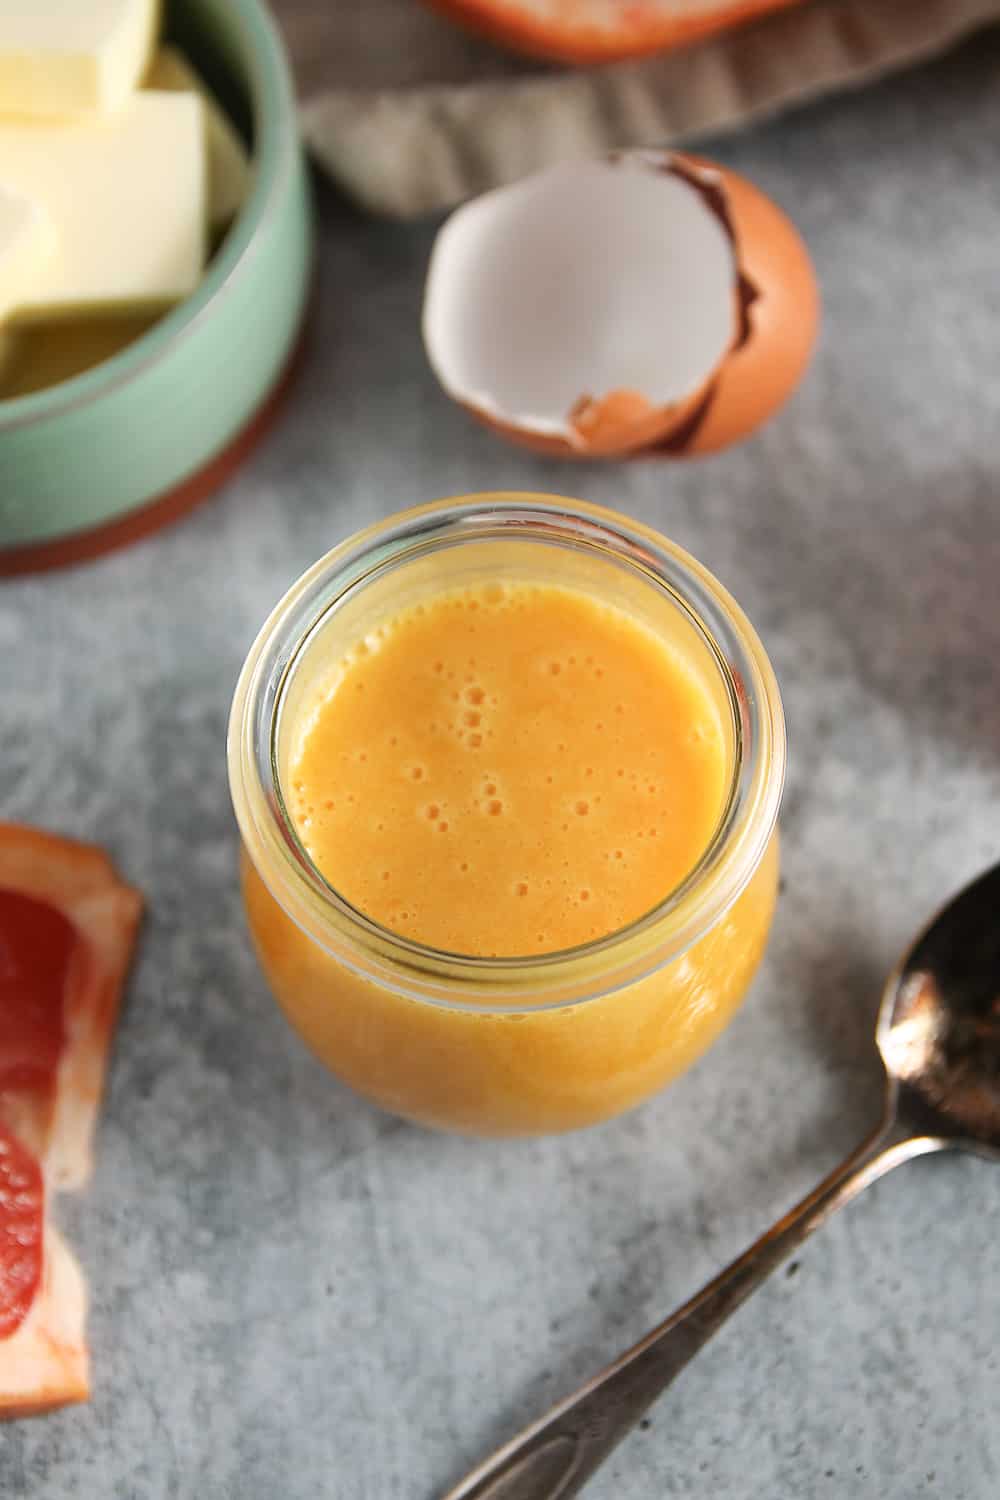 Tangy Grapefruit Curd is ideal for anyone who loves grapefruit. Serve it at brunch or jar it up to gift to a friend!